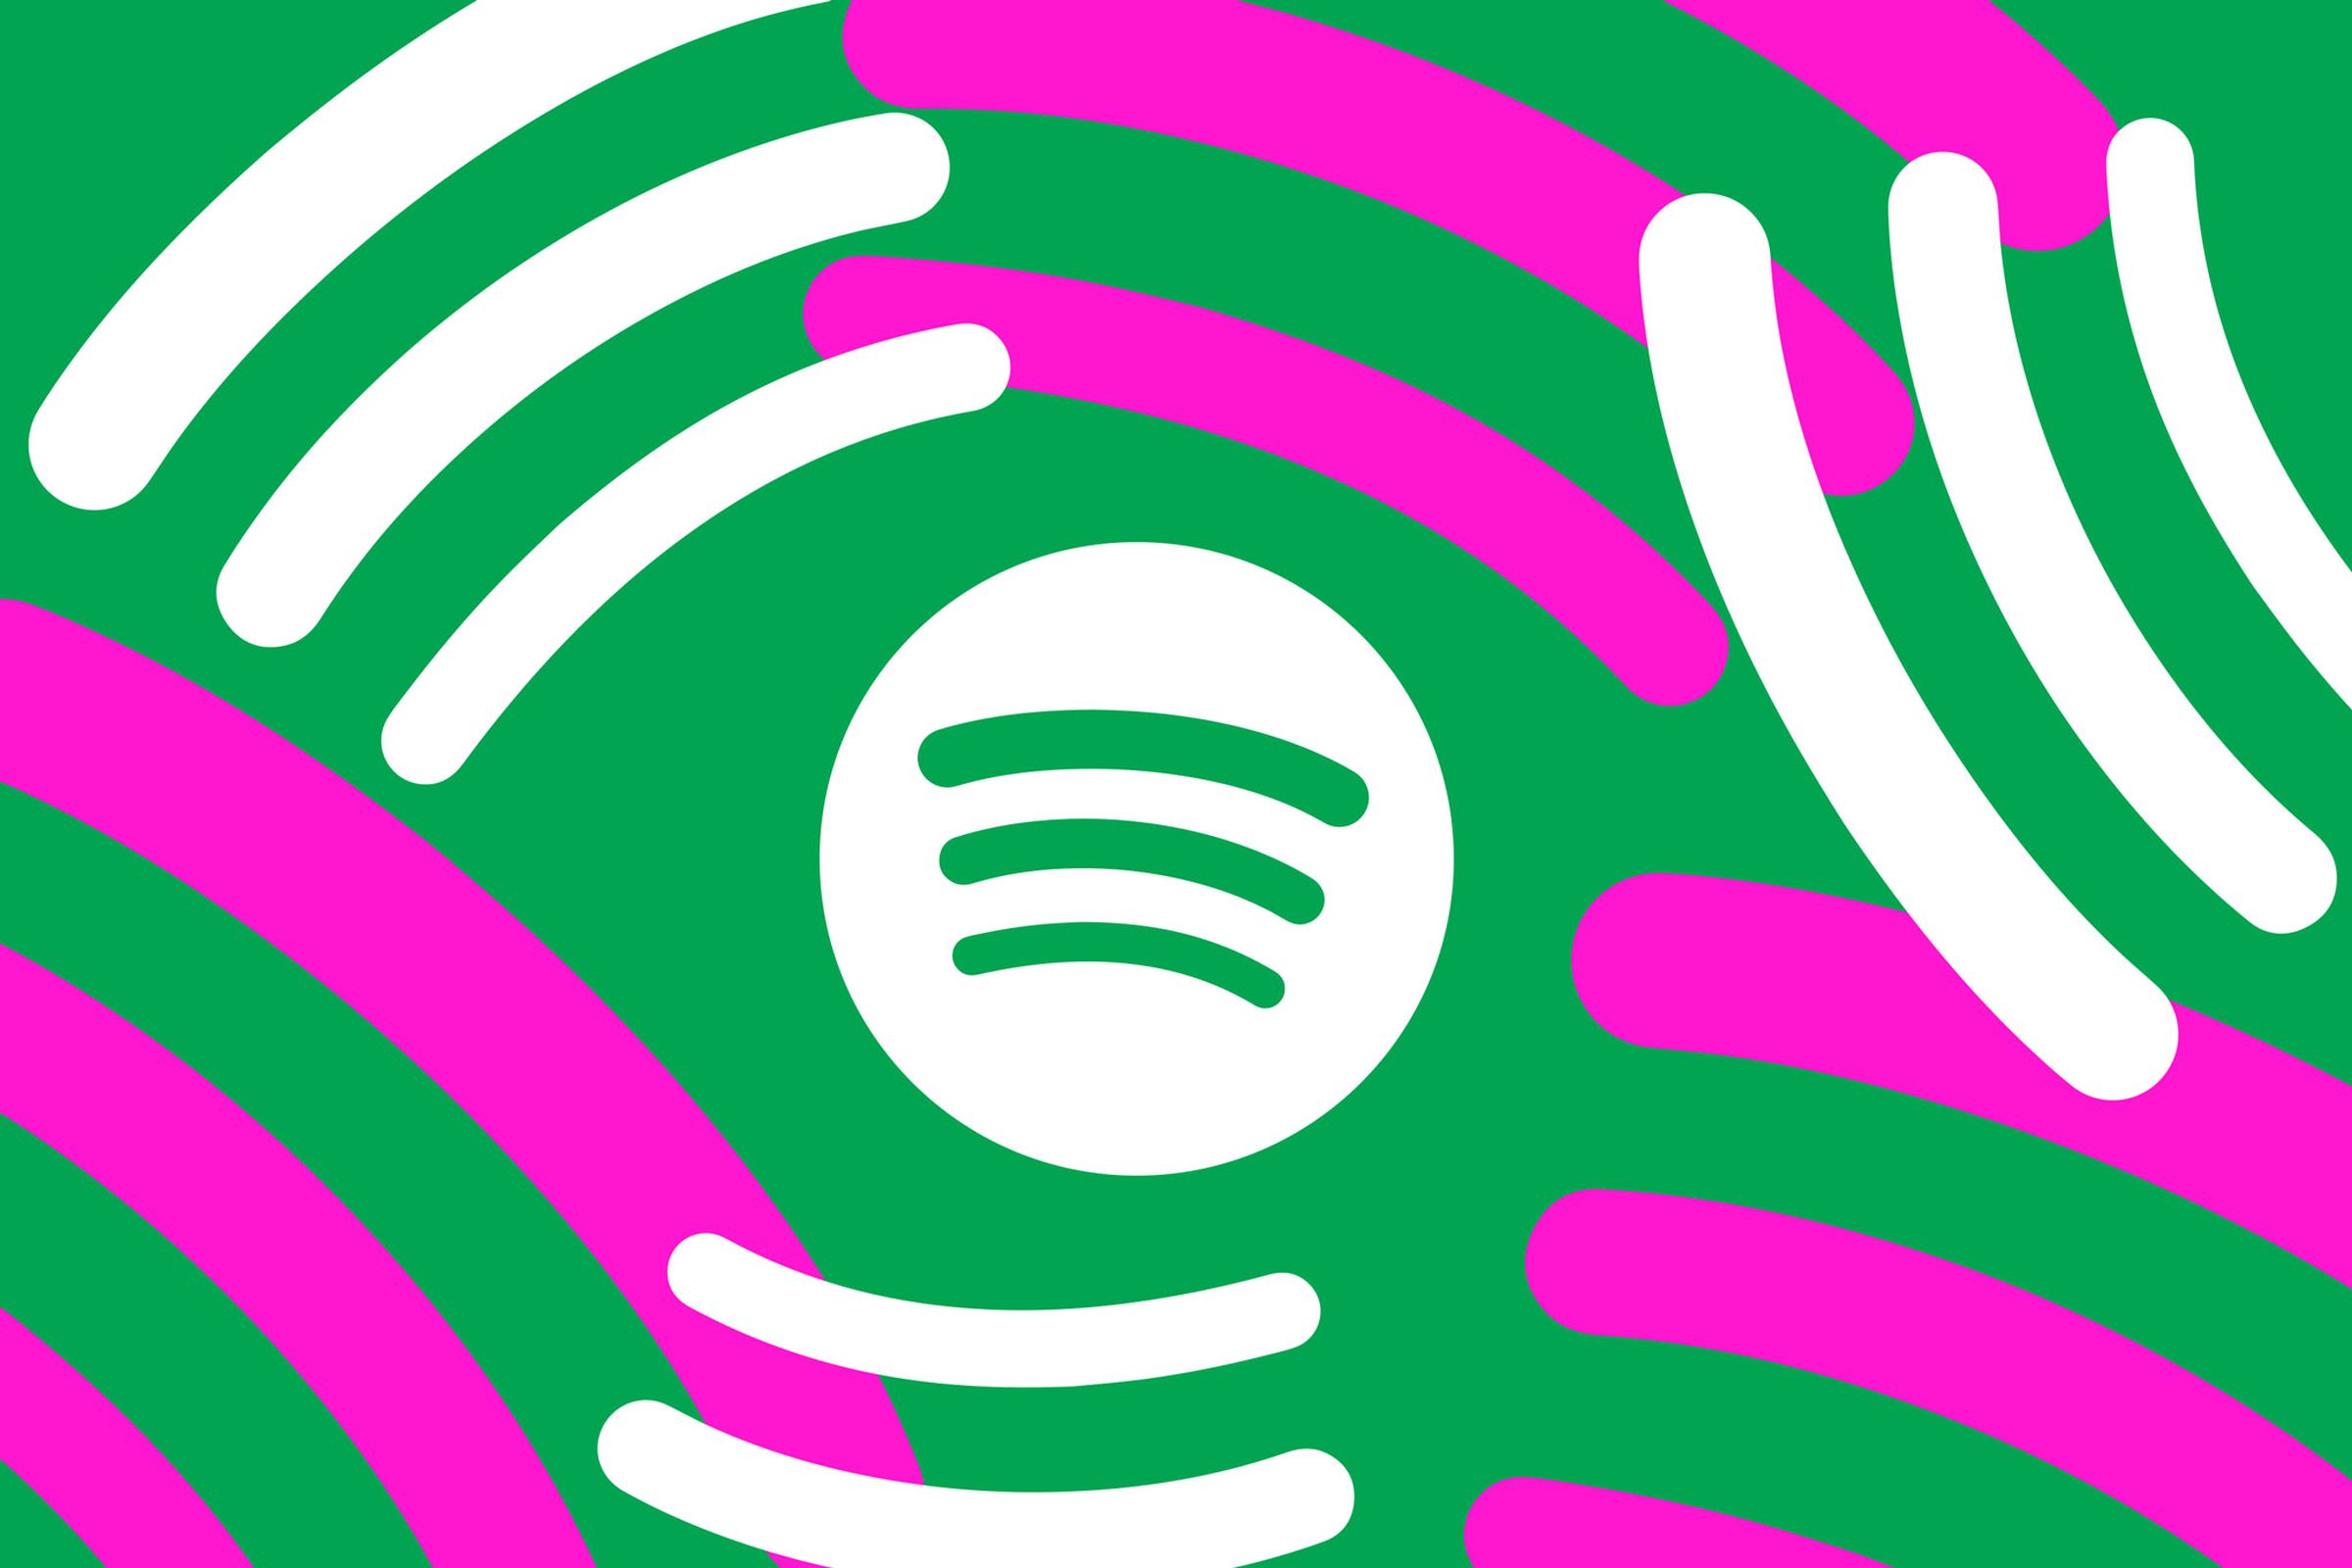 Illustration of the Spotify logo on a green background with white and pink stripes.